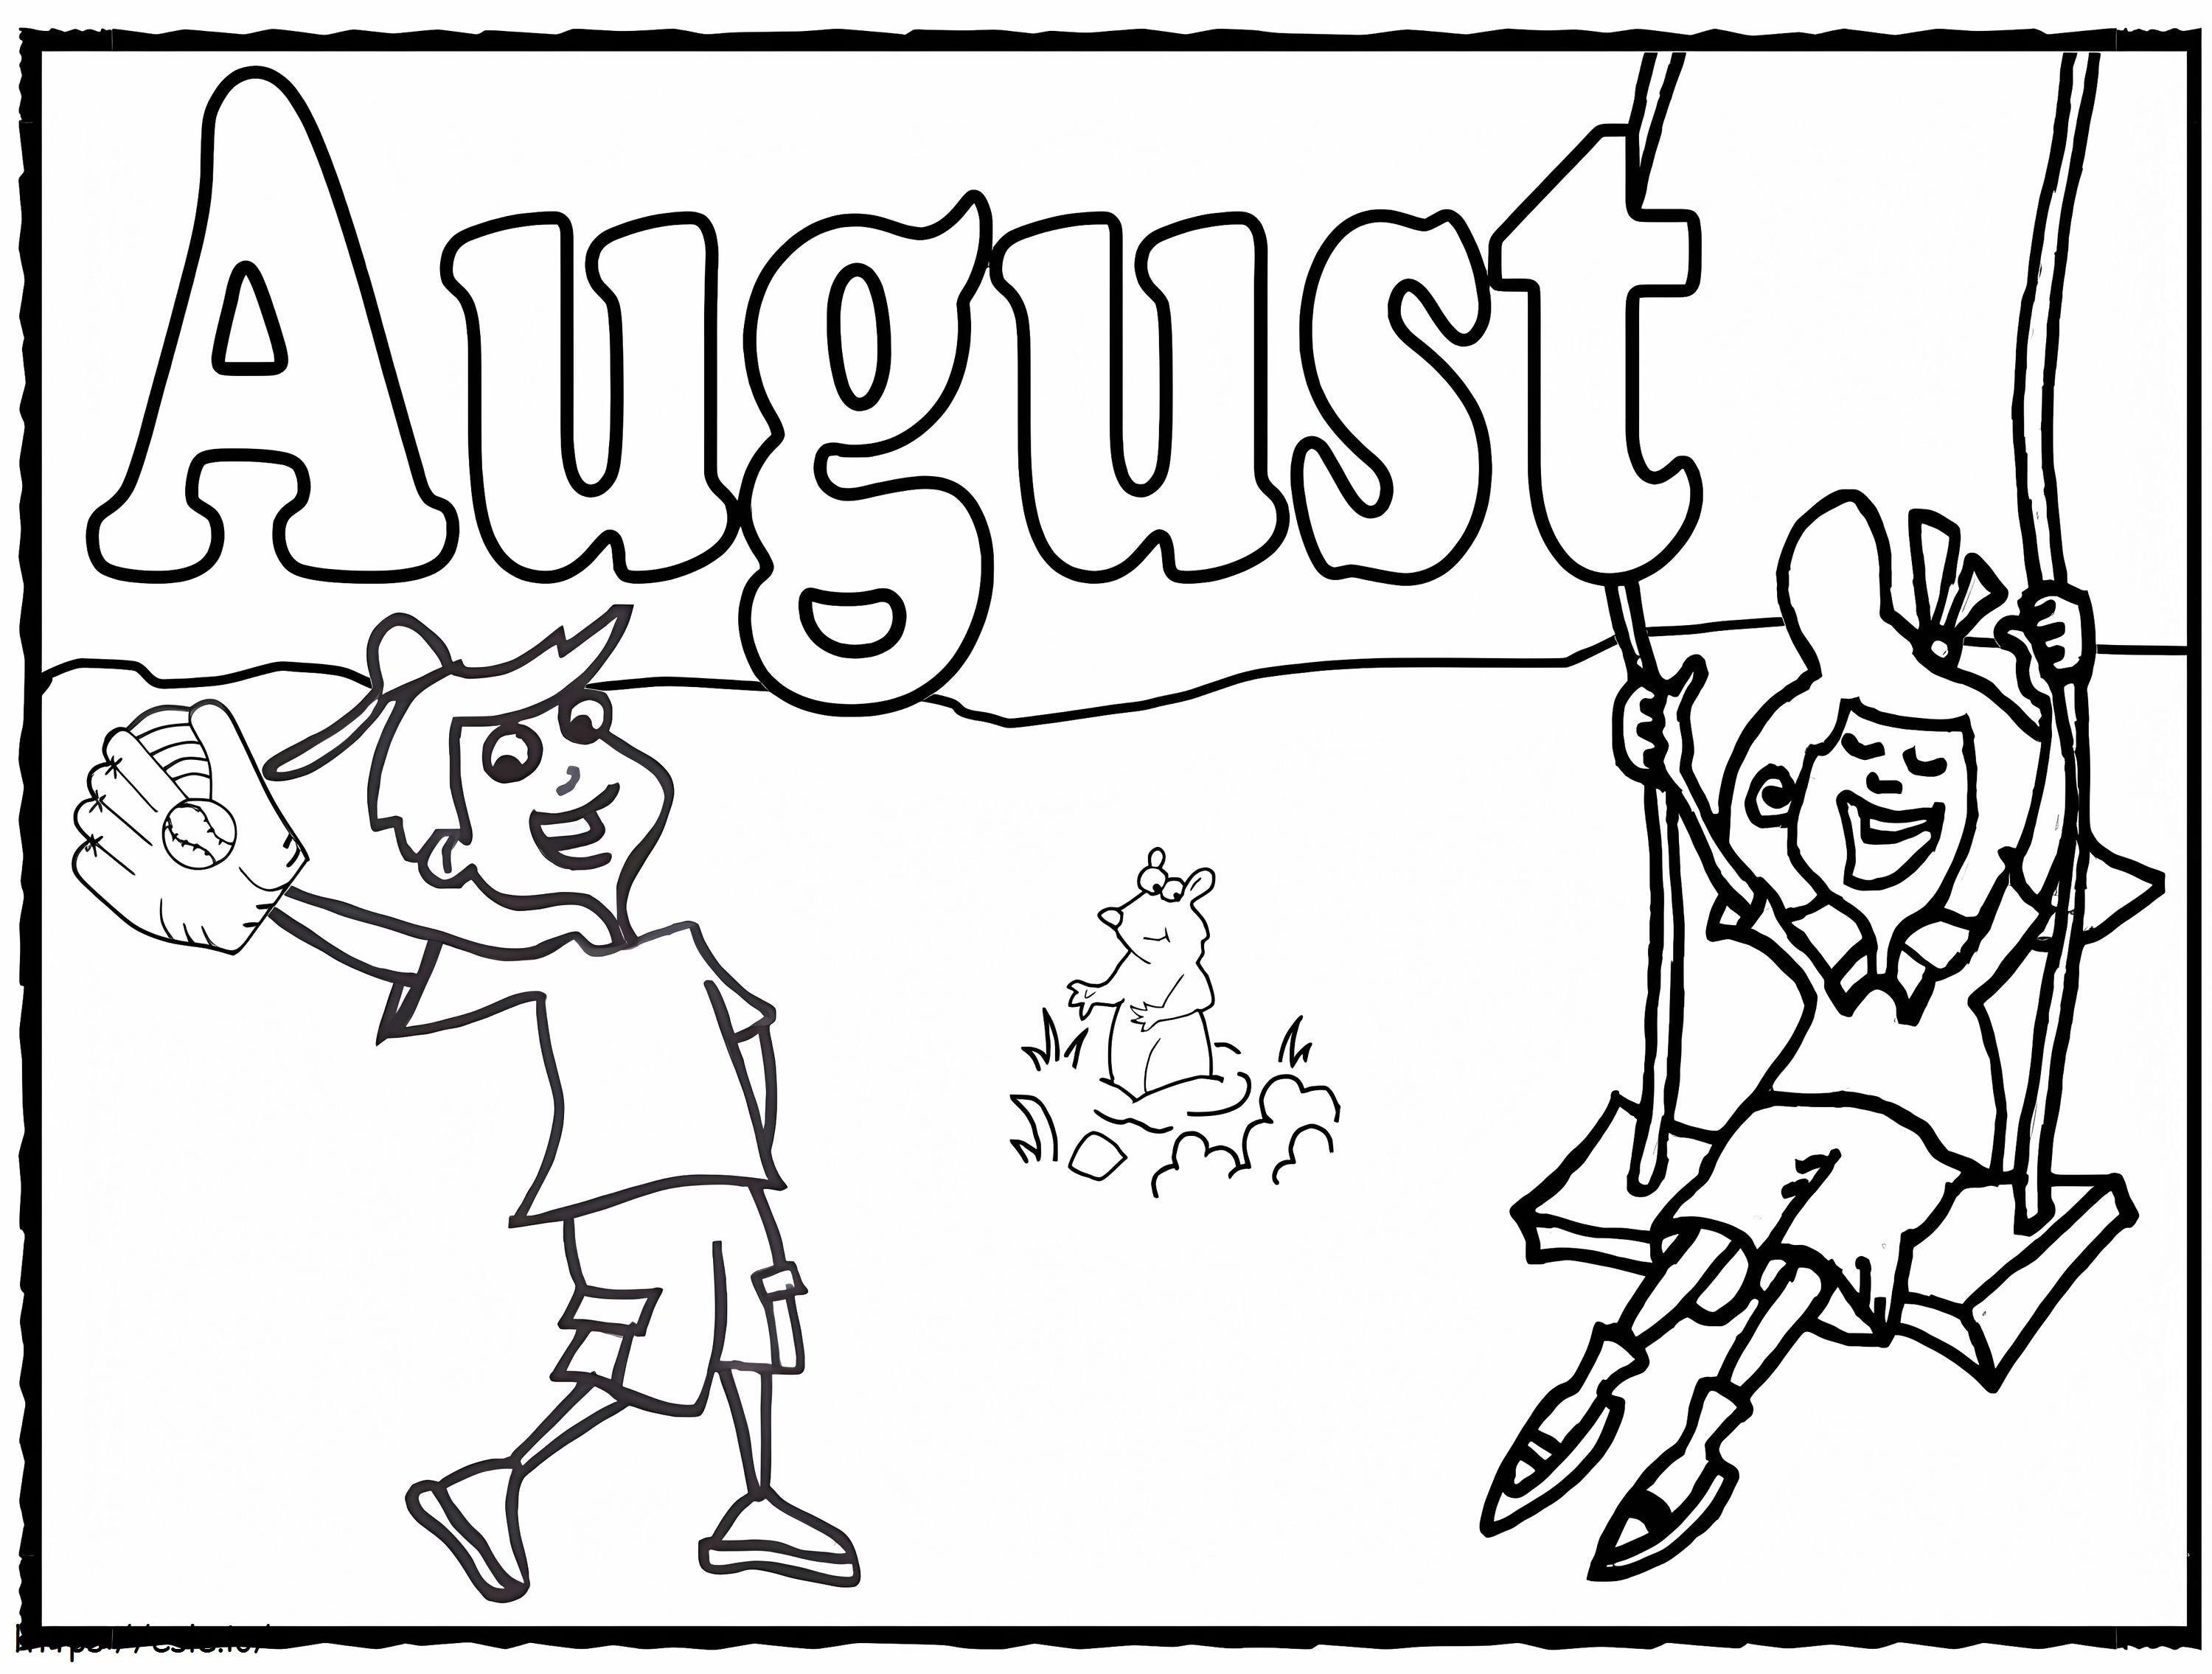 August 7 coloring page